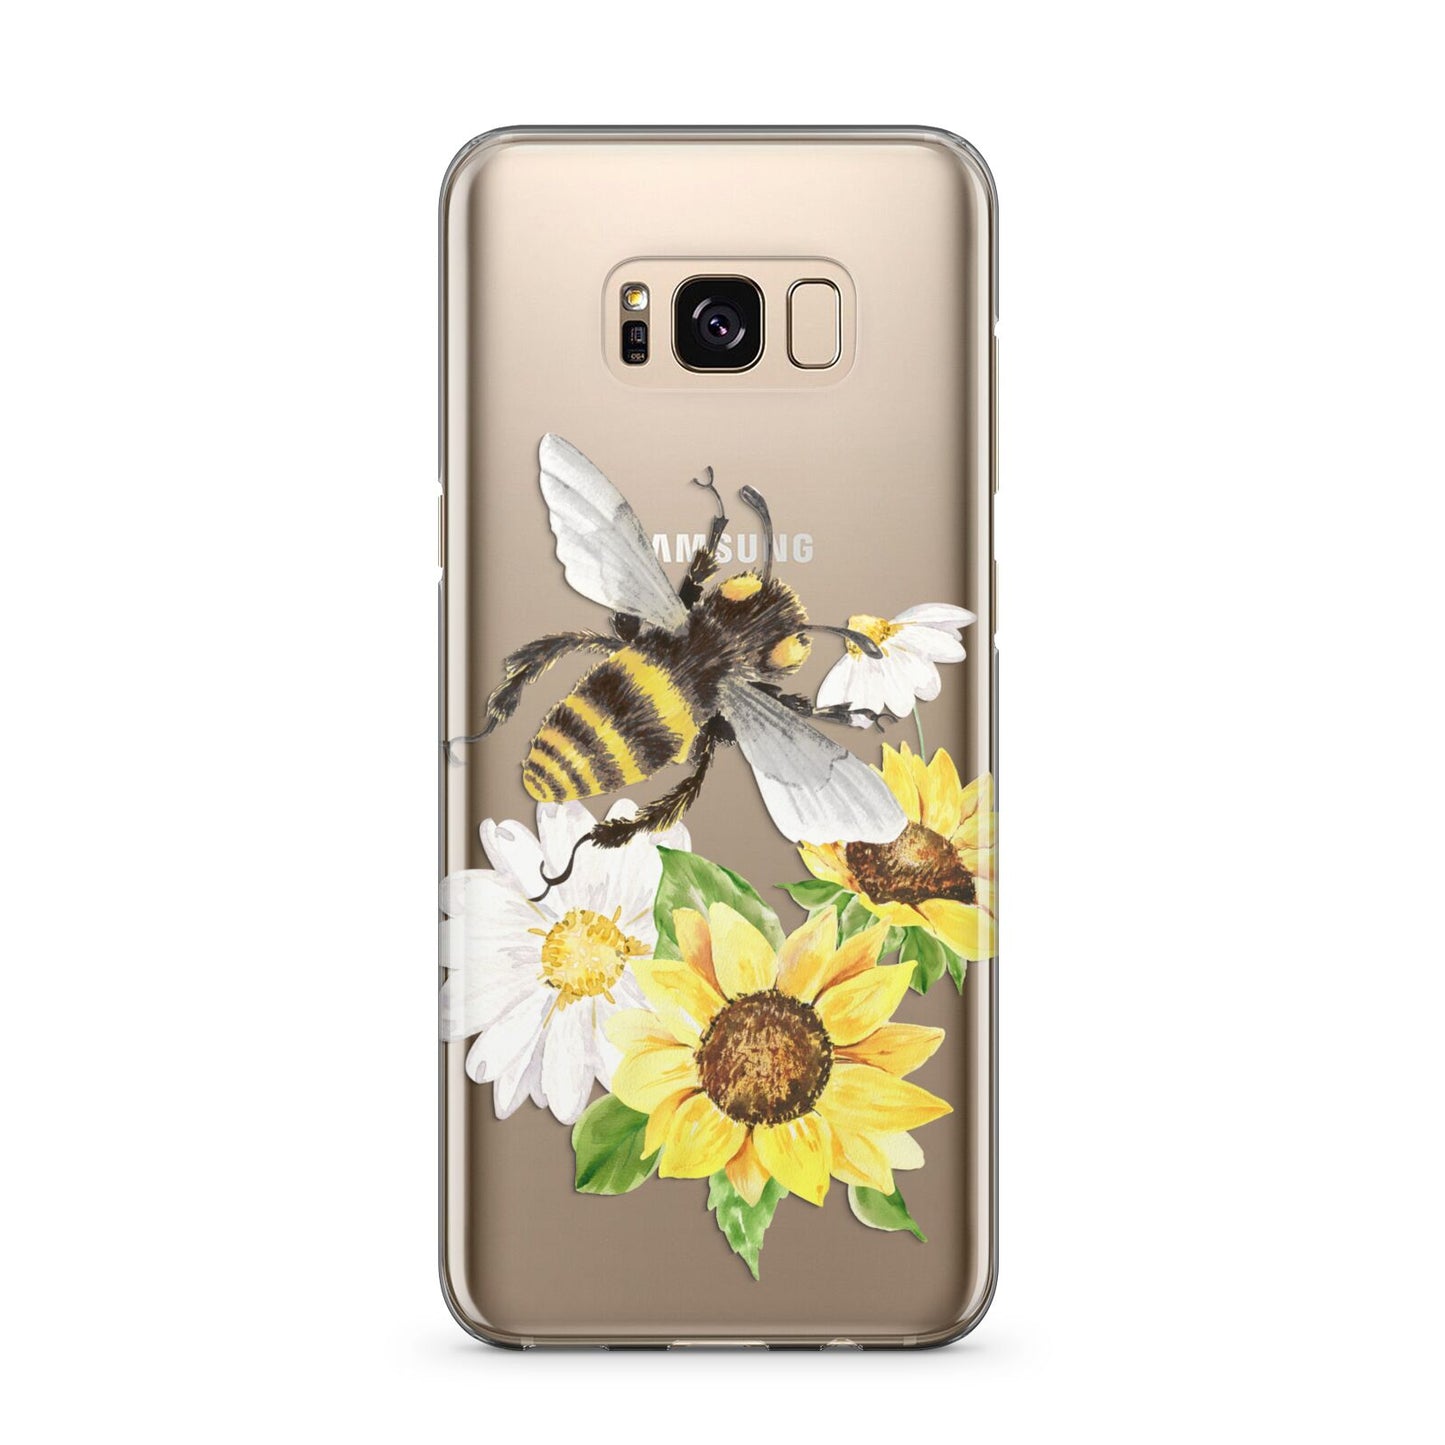 Watercolour Bee and Sunflowers Samsung Galaxy S8 Plus Case